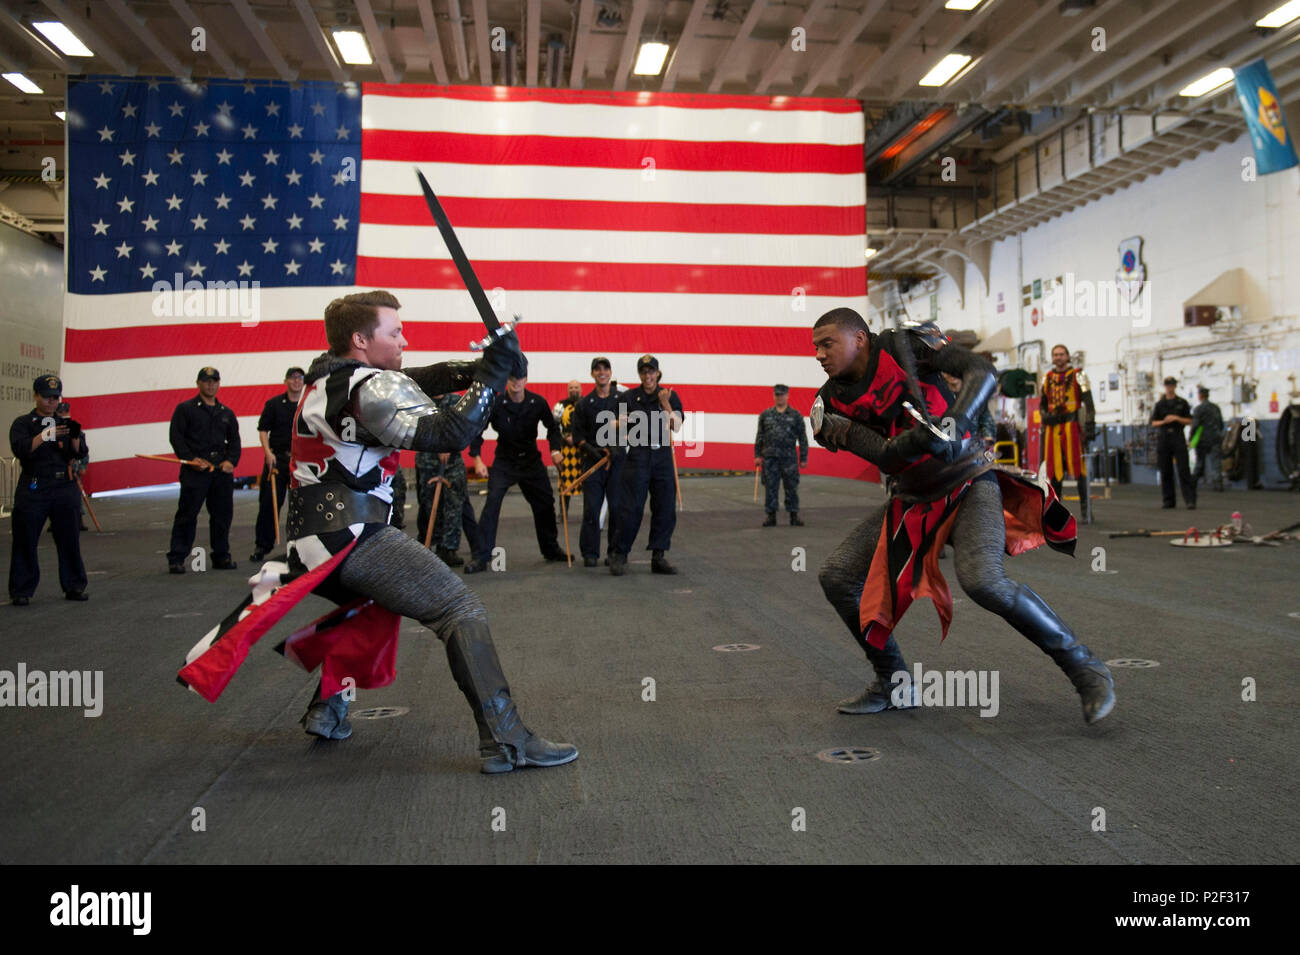 160901-N-MZ309-134 SAN PEDRO, California (Sept. 1, 2016) – Knights from the family dinner theater restaurant Medieval Times perform for Sailors on board amphibious assault ship USS America (LHA 6) in the ship’s hangar bay during the inaugural Los Angeles Fleet Week. Fleet week offers the public an opportunity to tour ships, meet Sailors, Marines, and members of the Coast Guard and gain a better understanding of how the sea service support the national defense of the United States and freedom of the seas. (U.S. Navy photo by Mass Communication Specialist 1st Class Ryan Riley/Released) Stock Photo